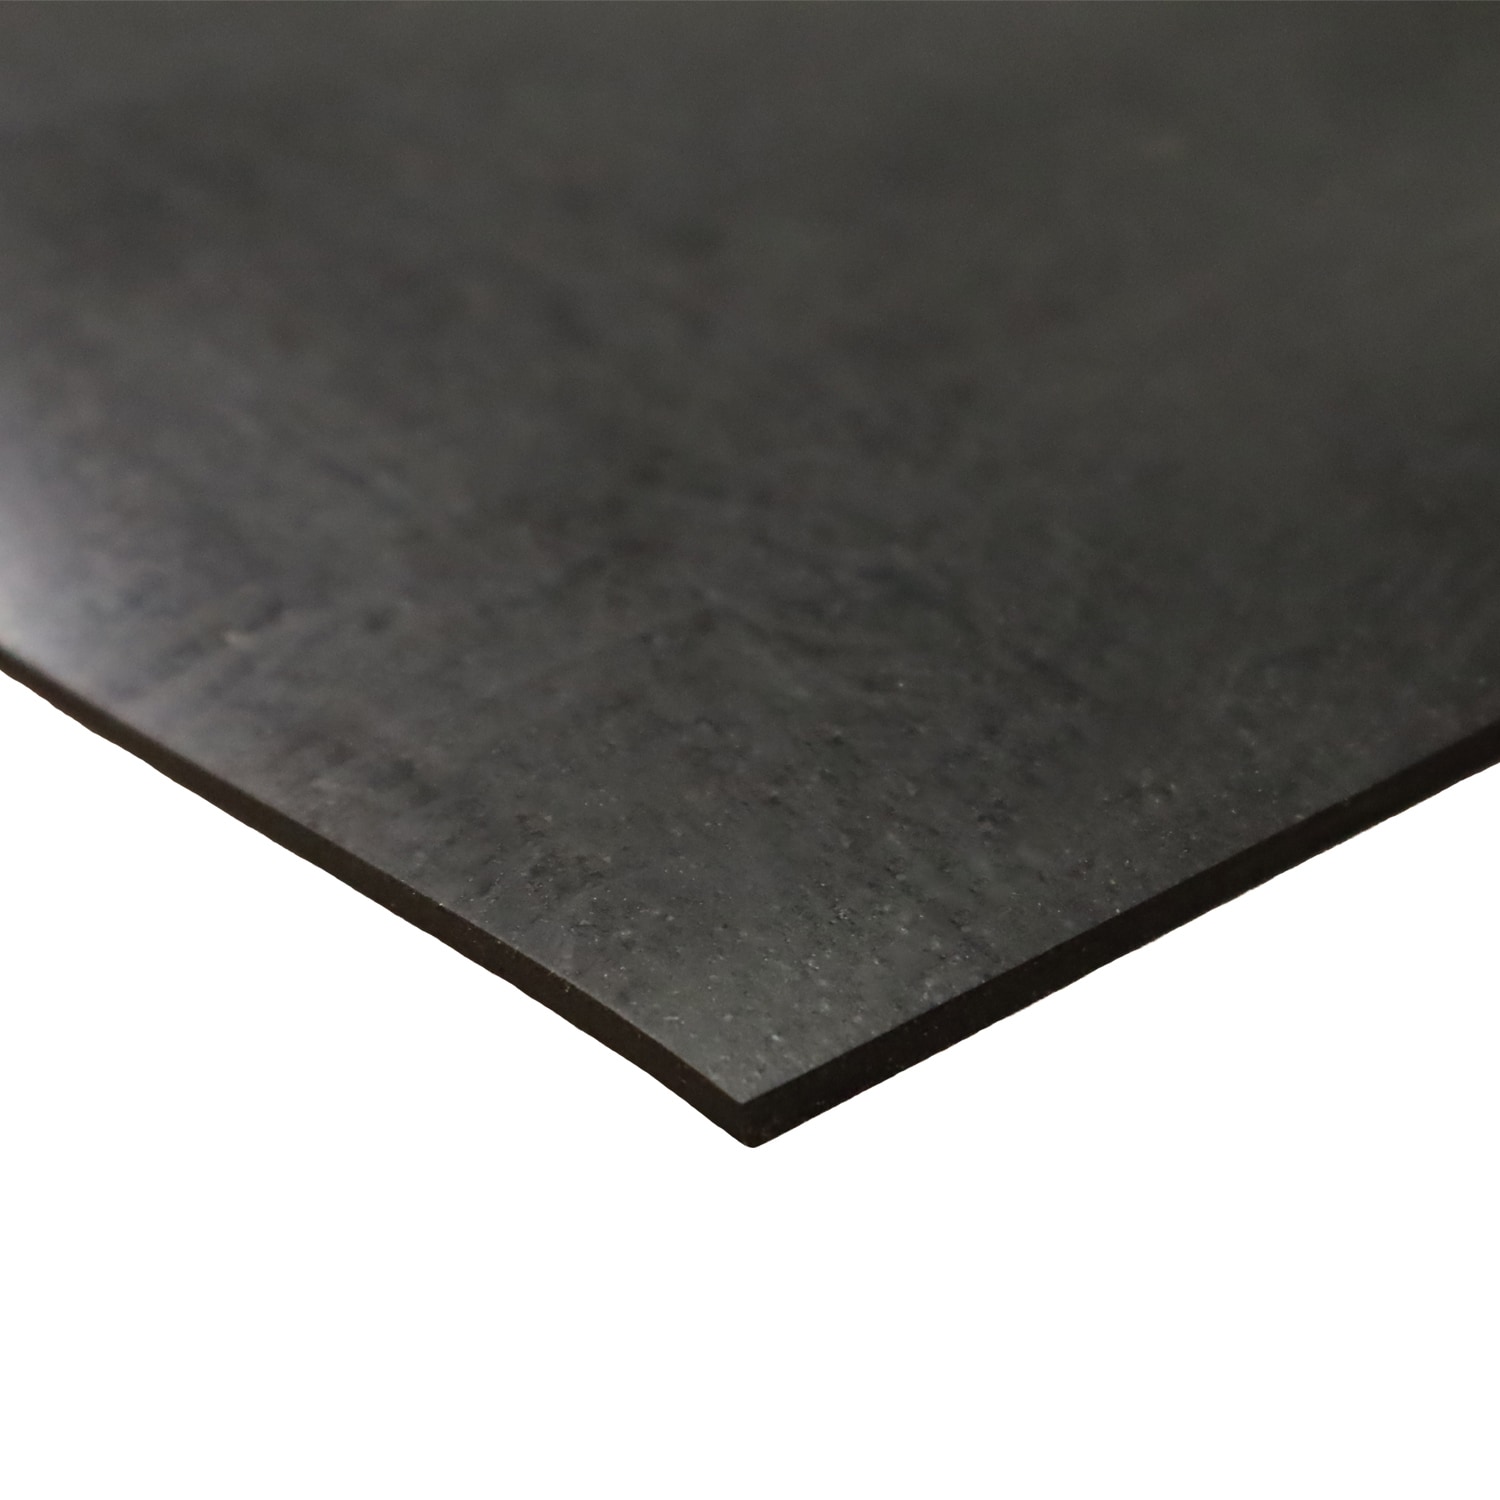 Thin Rubber Sheet for Therapy Band Use